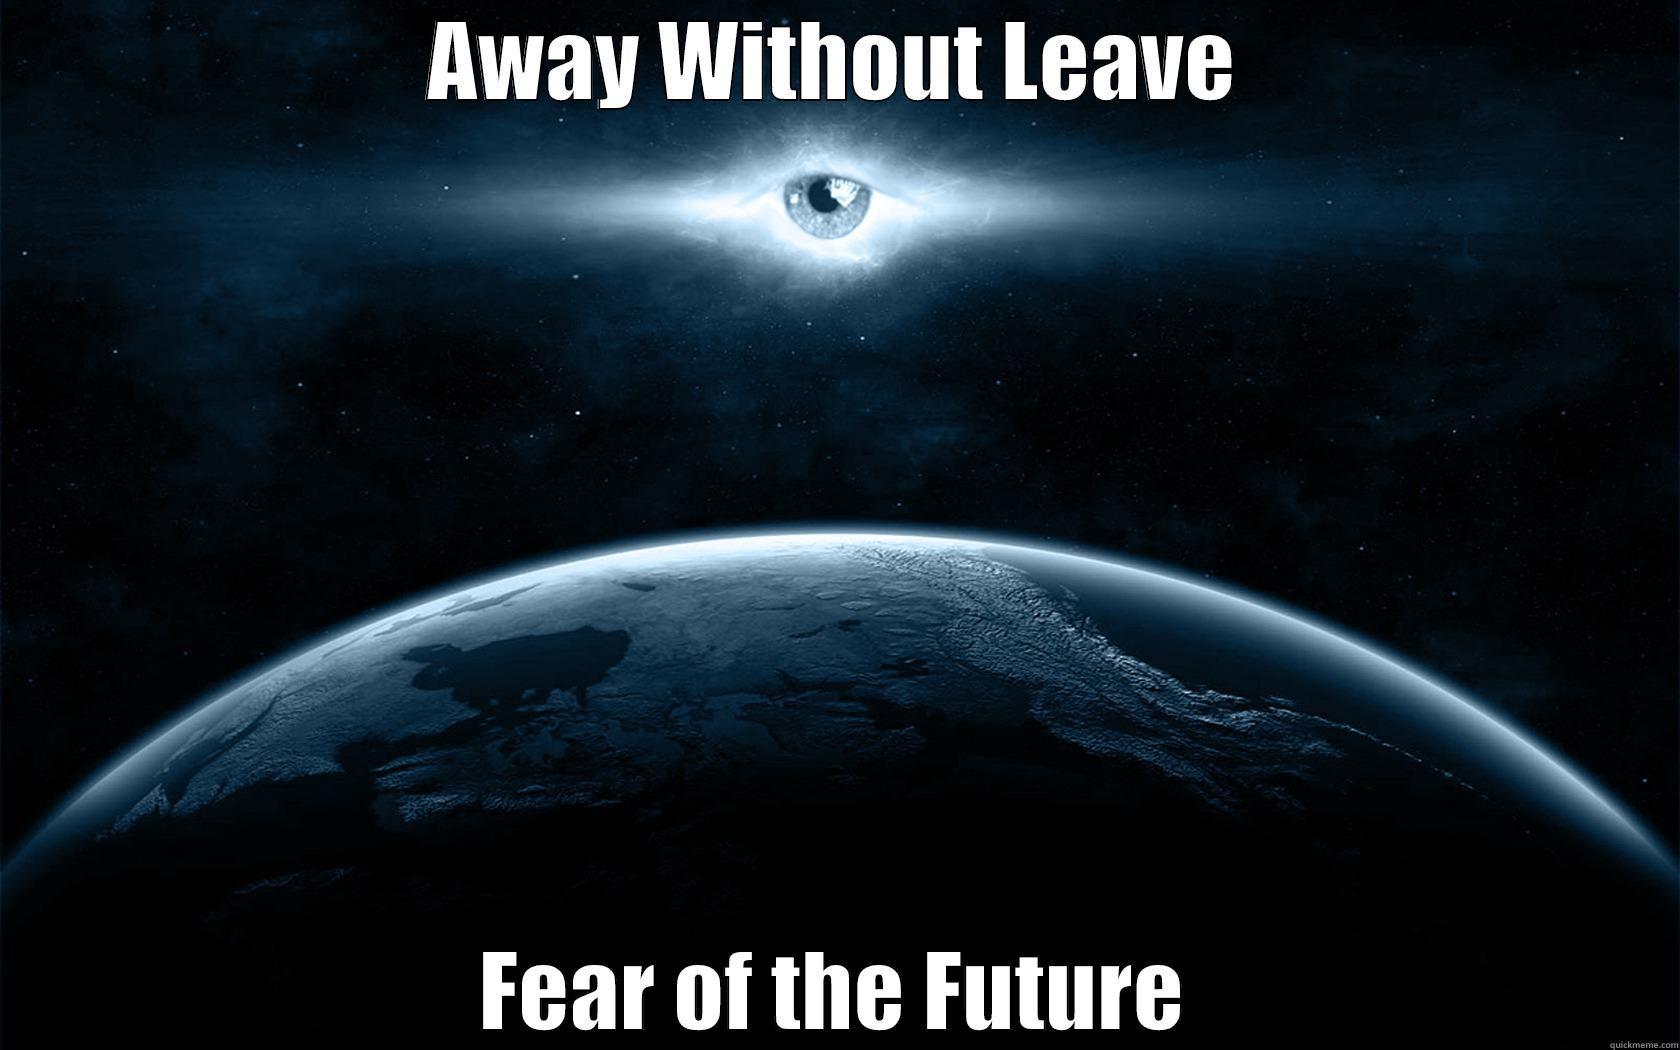 awol ya'll - AWAY WITHOUT LEAVE FEAR OF THE FUTURE Misc